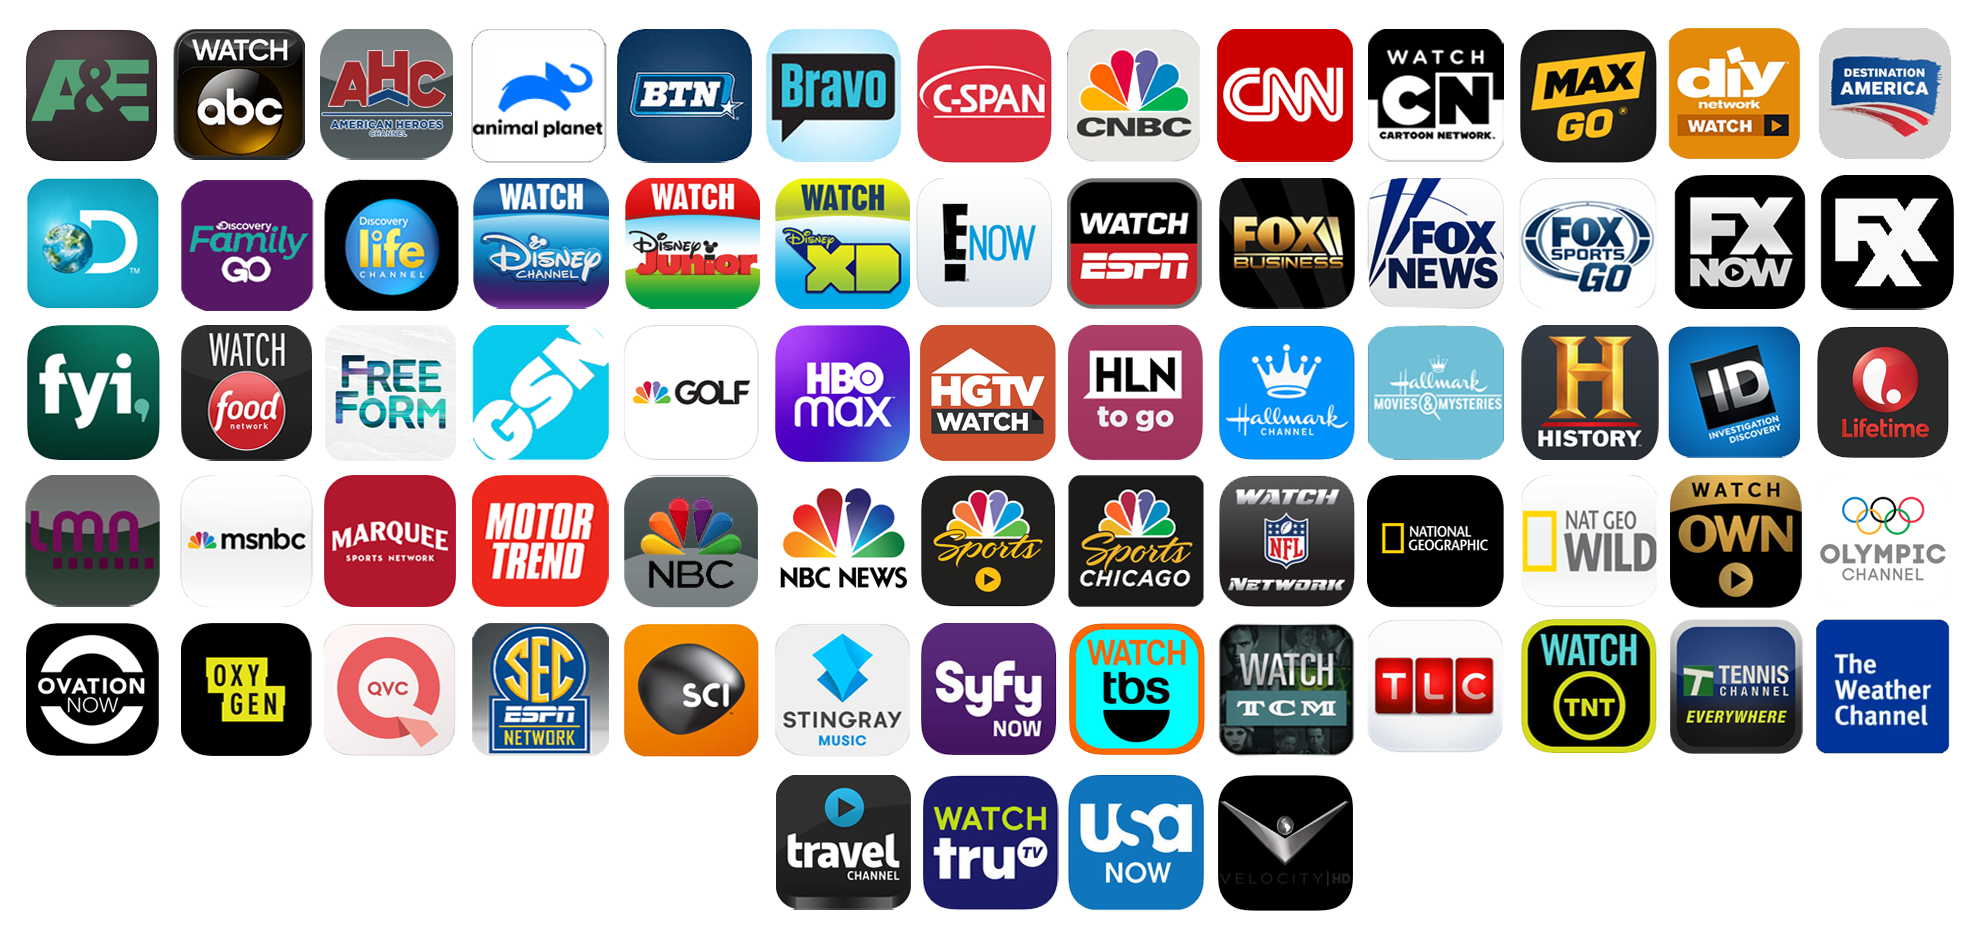 cable tv channels